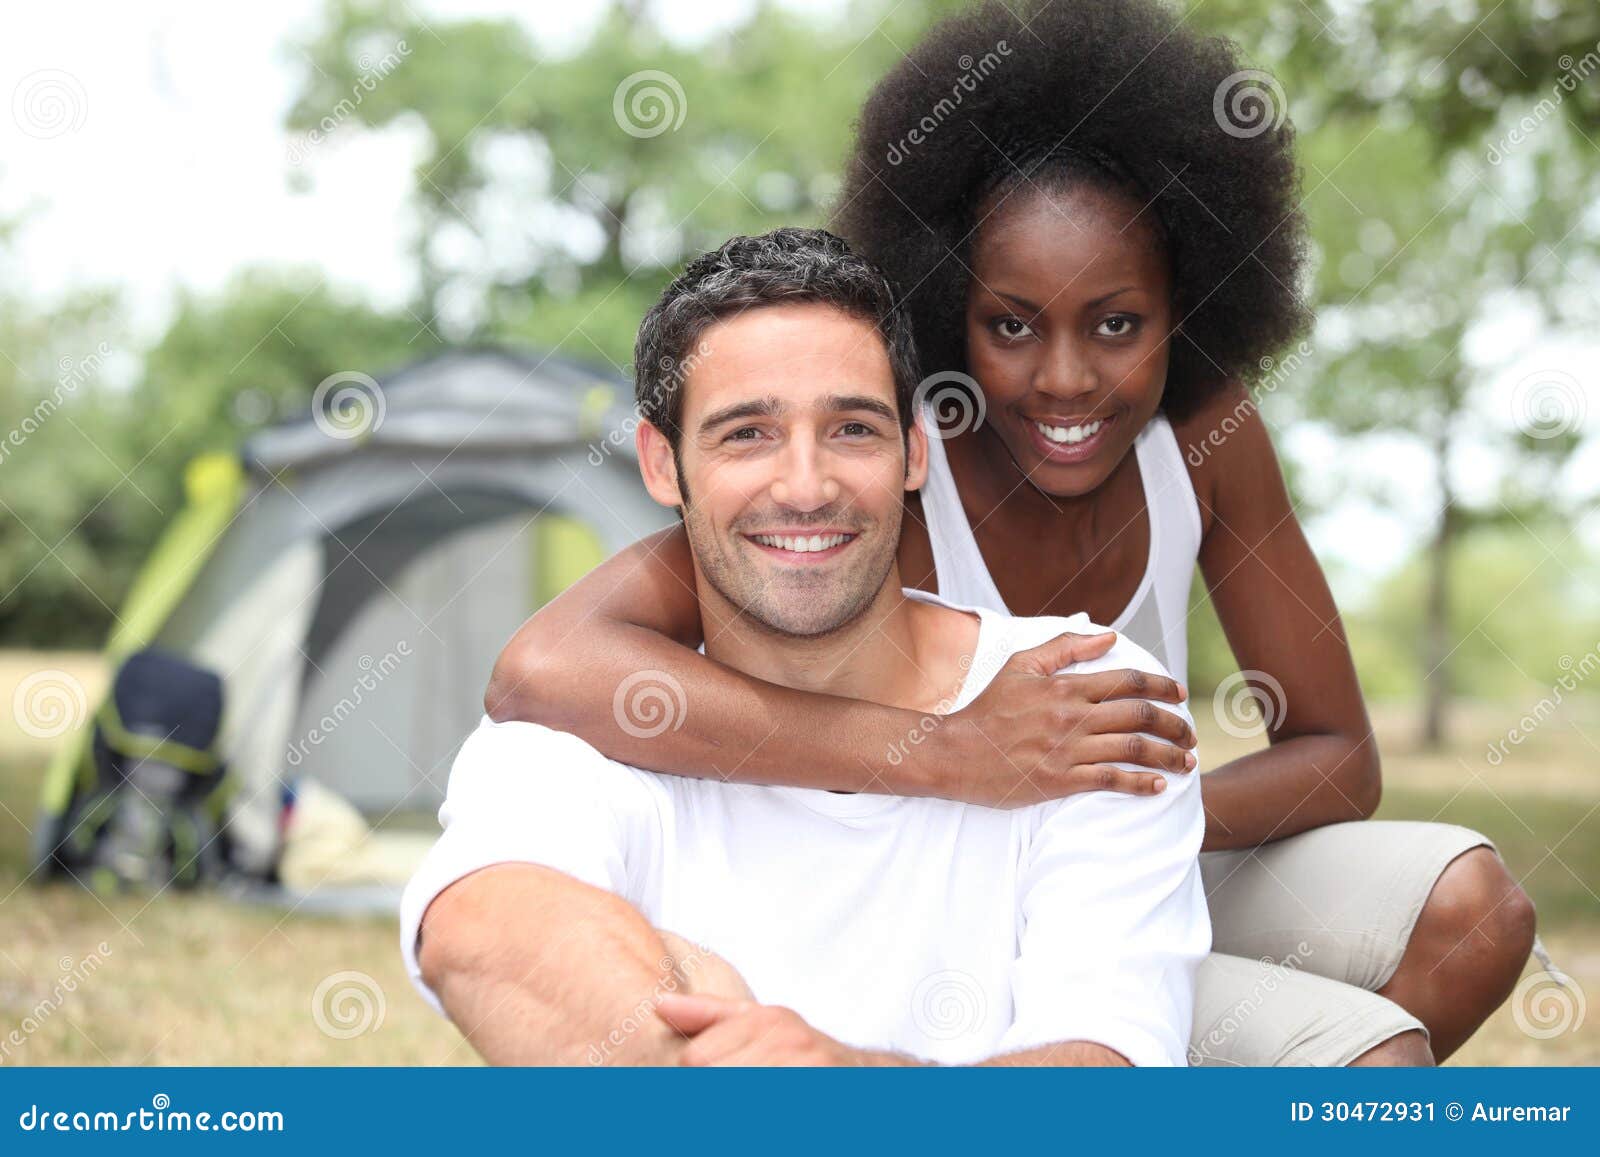 Download this Couple Having Fun... picture